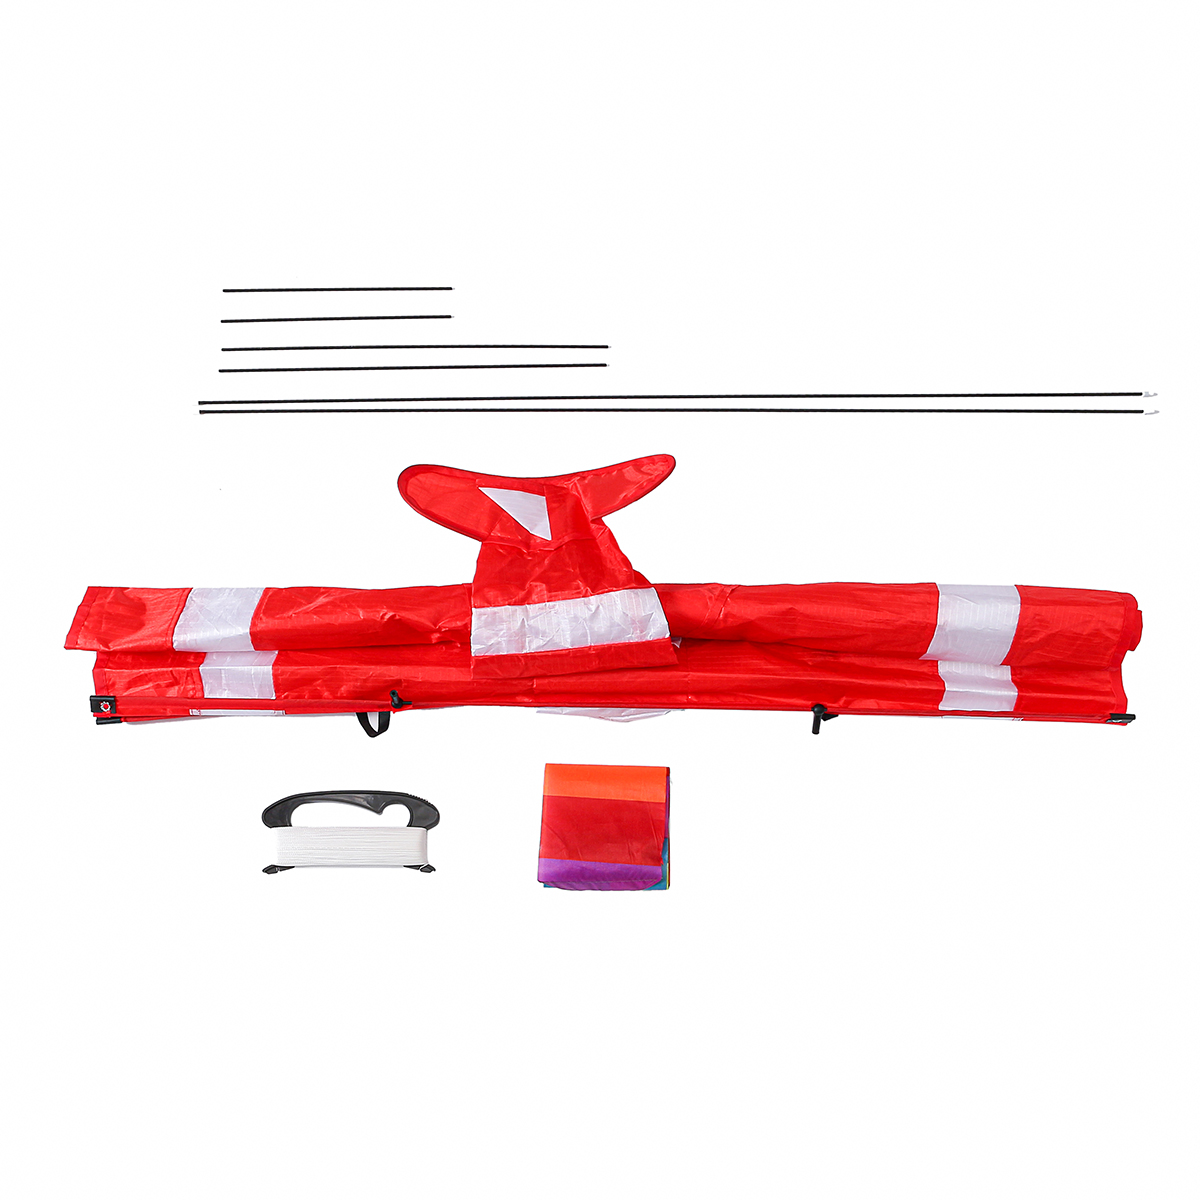 Colorful-3D-Aircraft-Kite-With-Handle-and-Line-Good-Flying-Gift-1610431-7